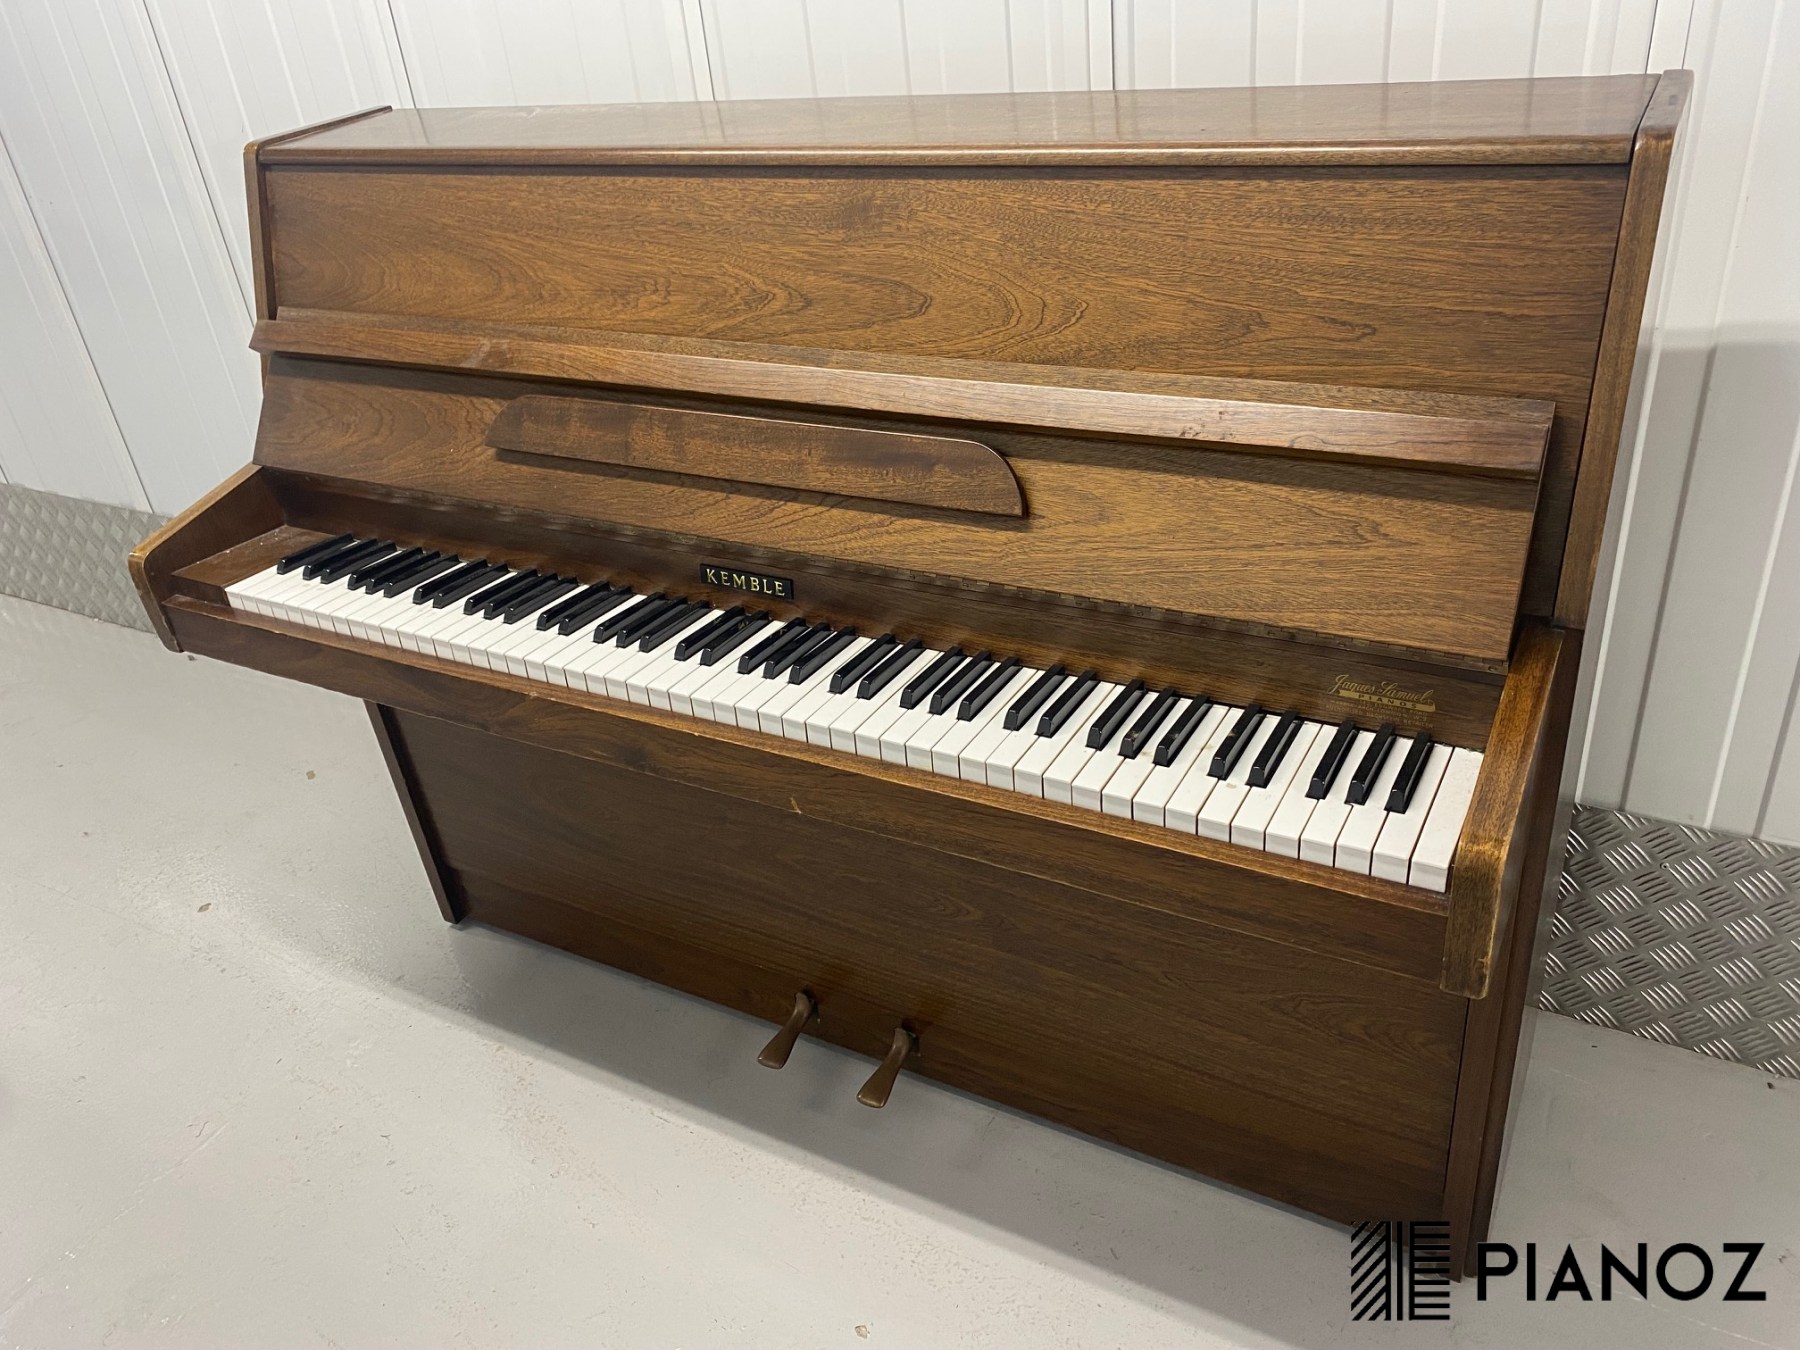 Kemble Classic Upright Piano piano for sale in UK